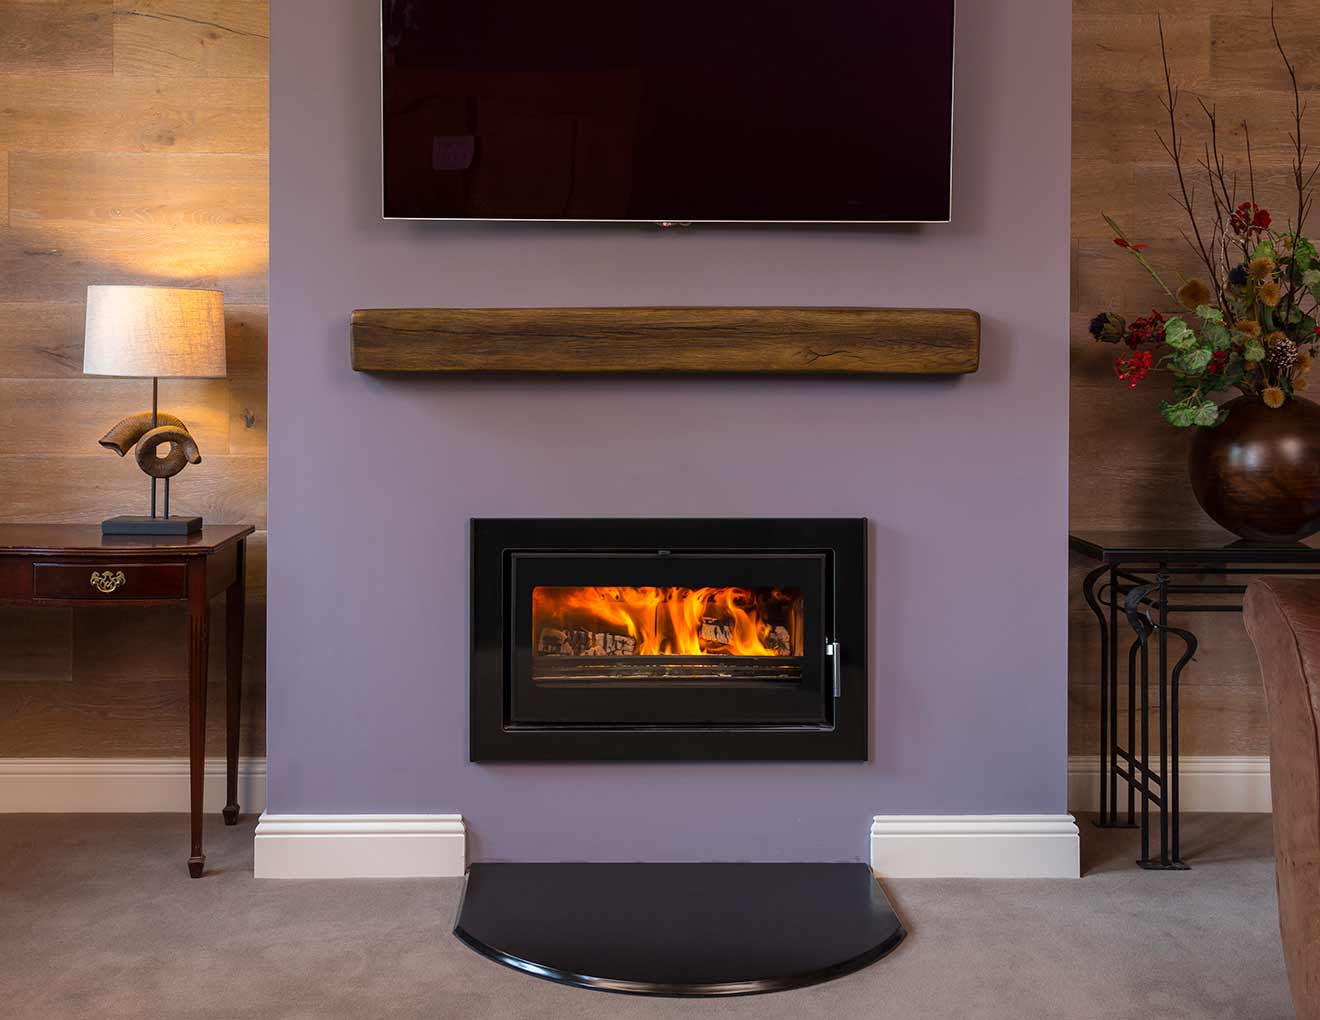 Woodstoves and Fireplaces Unique Cassette Stoves Wood Burning & Multi Fuel Dublin